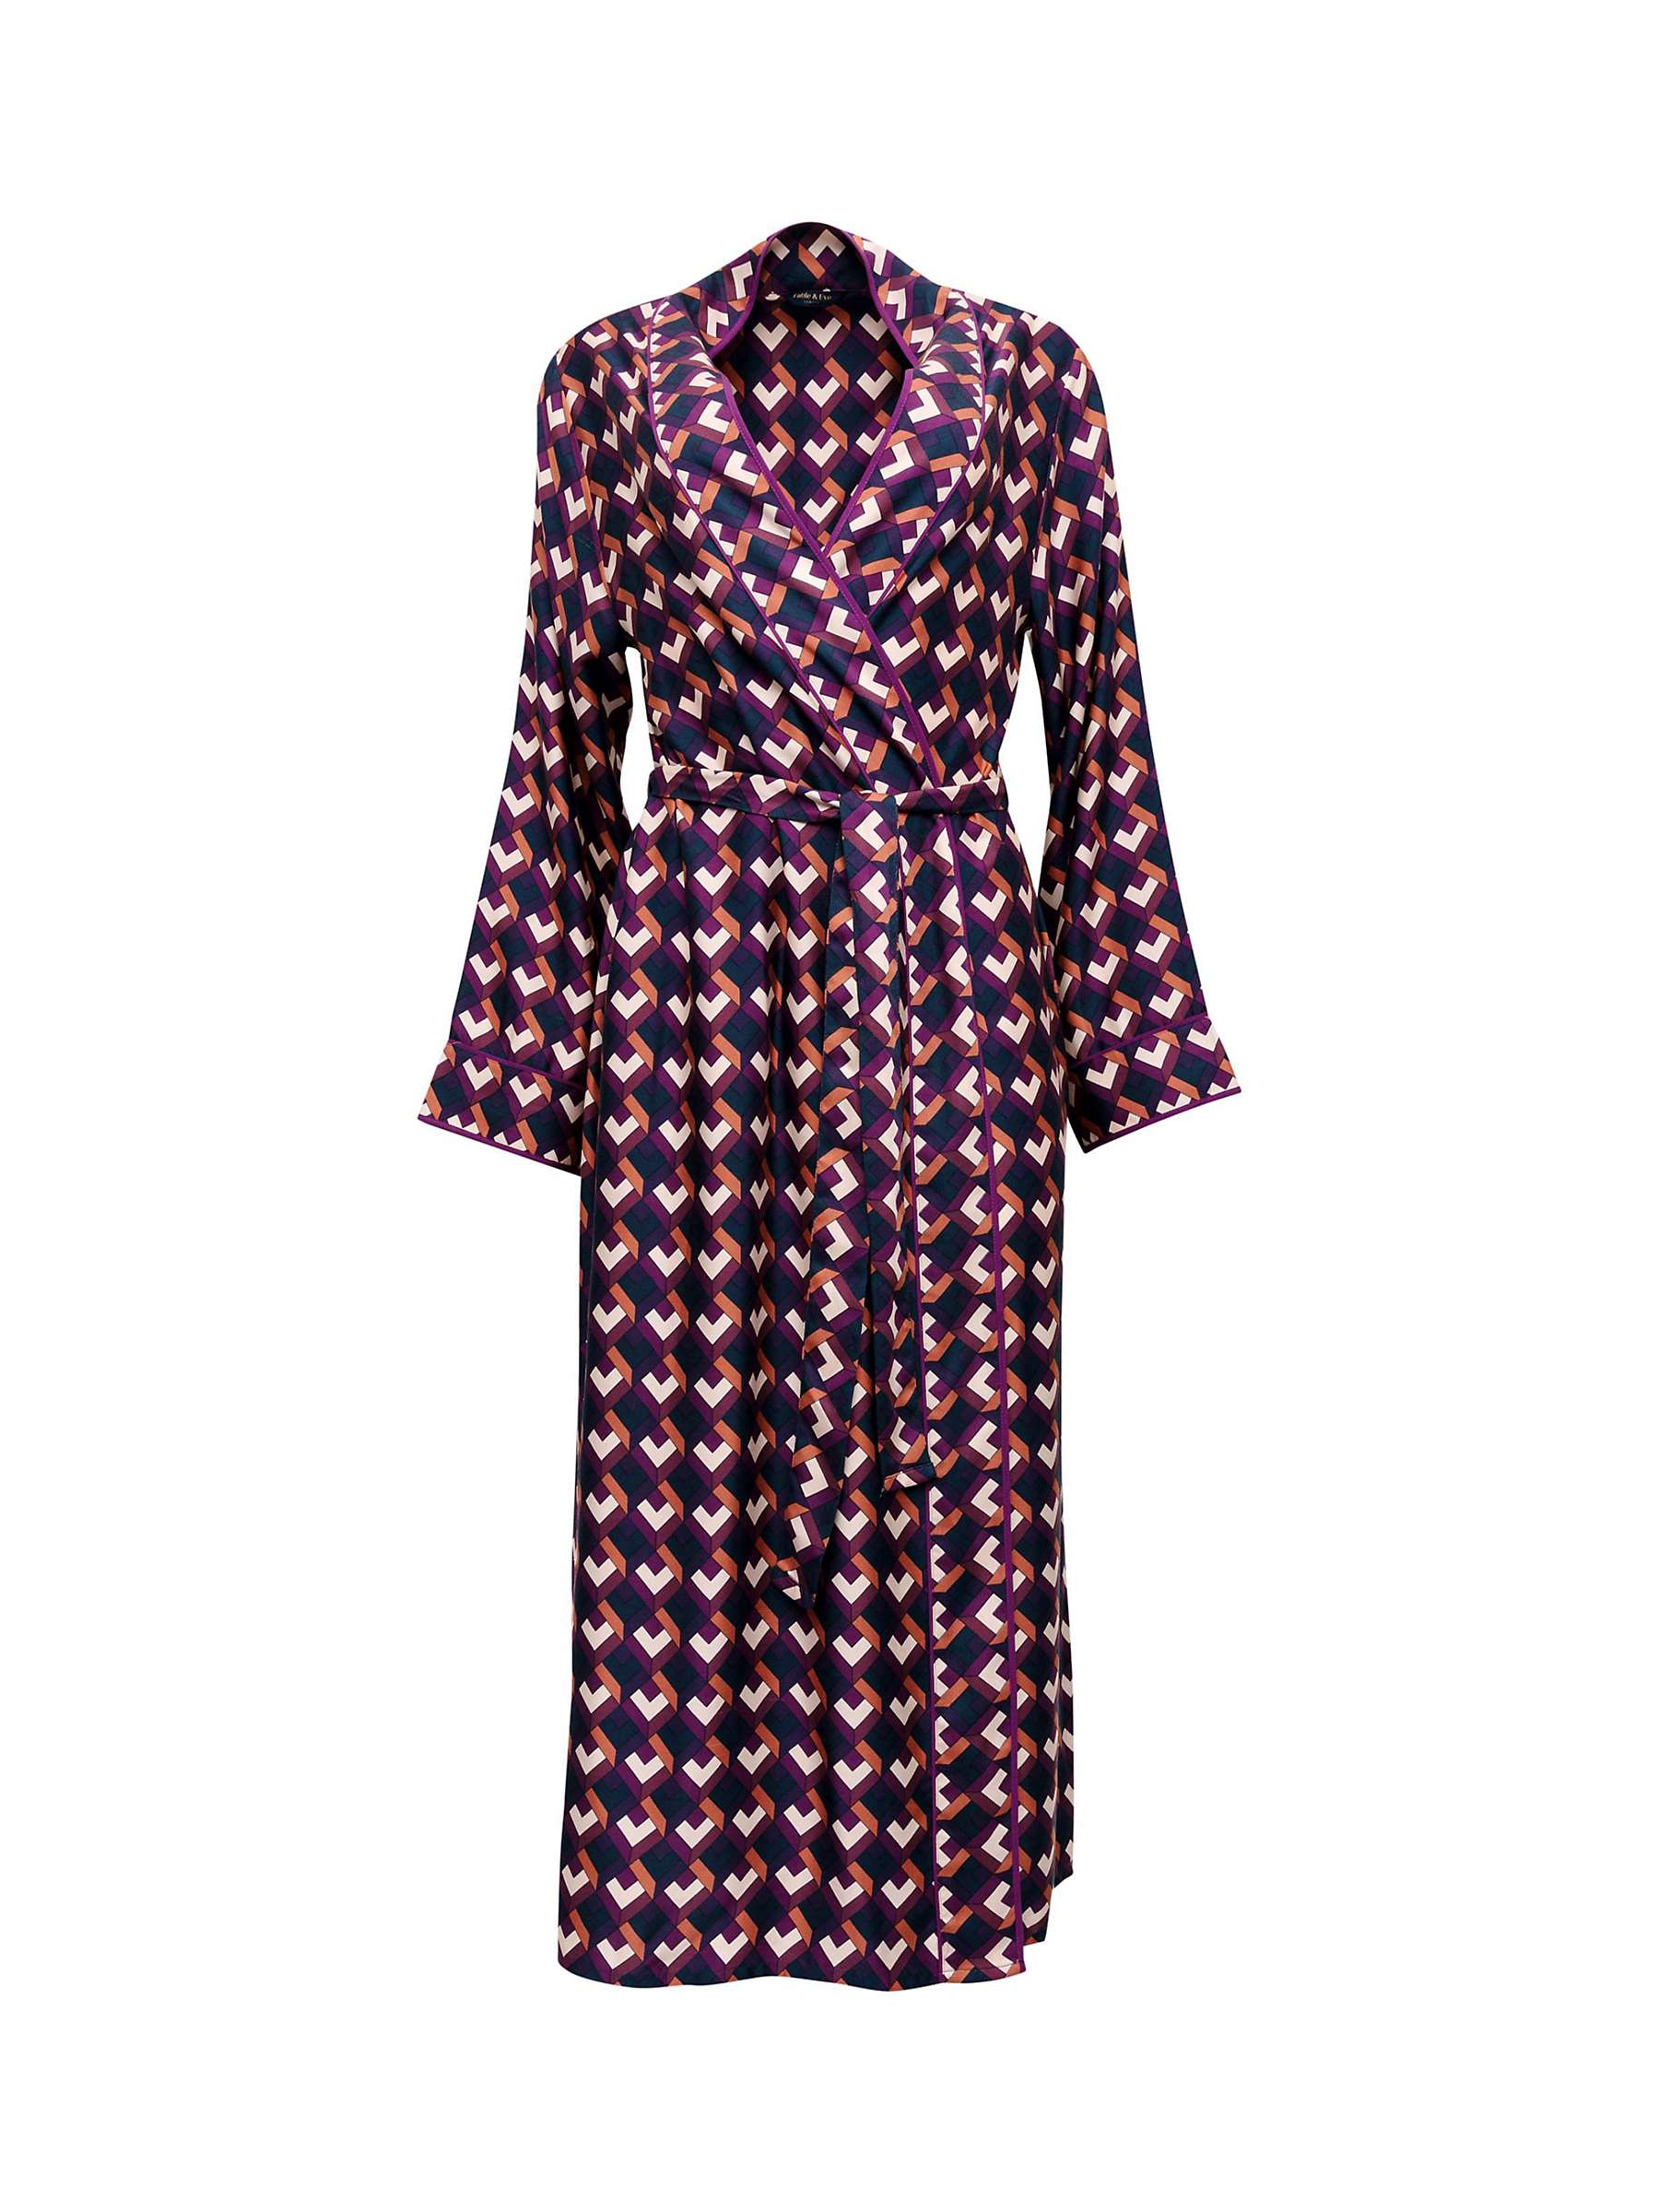 Buy Fable & Eve Southbank Geo Print Long Dressing Gown, Navy Online at johnlewis.com